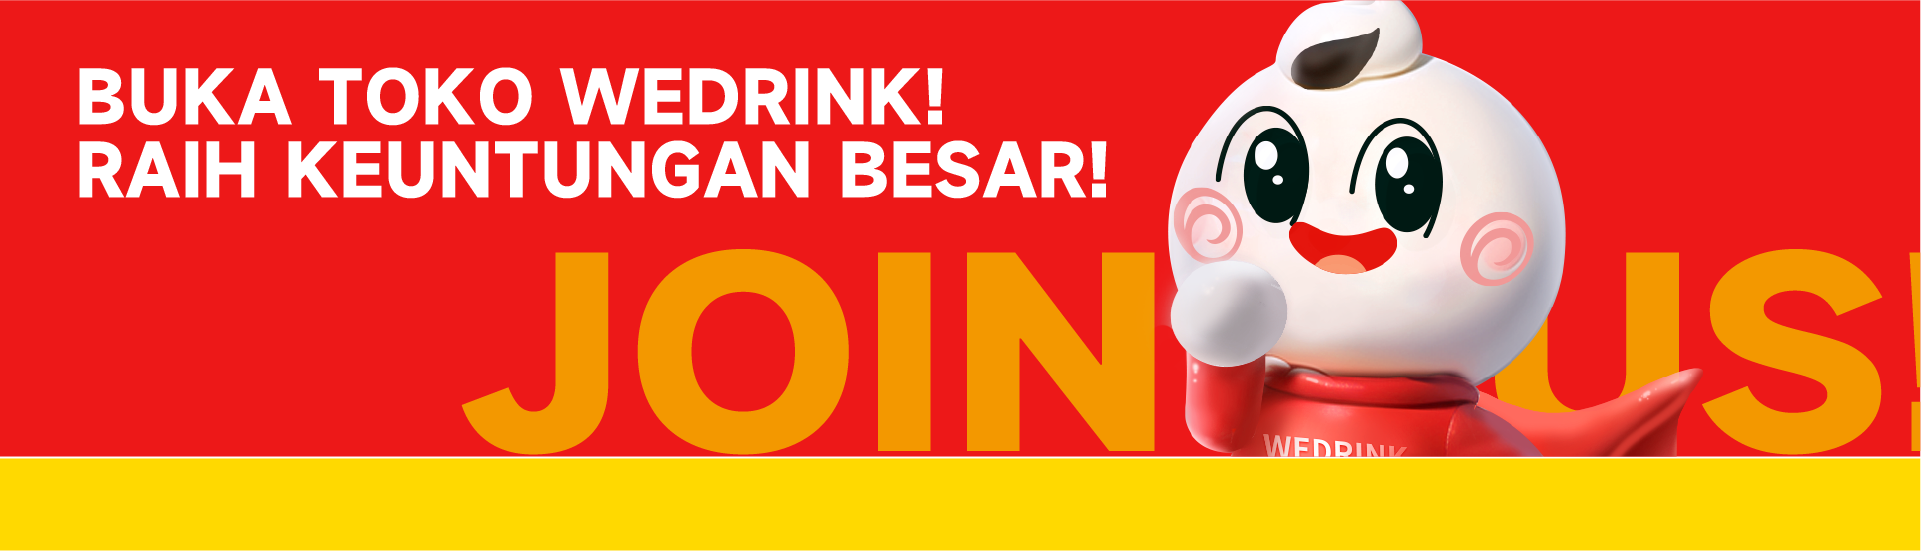 wedrink join us banner